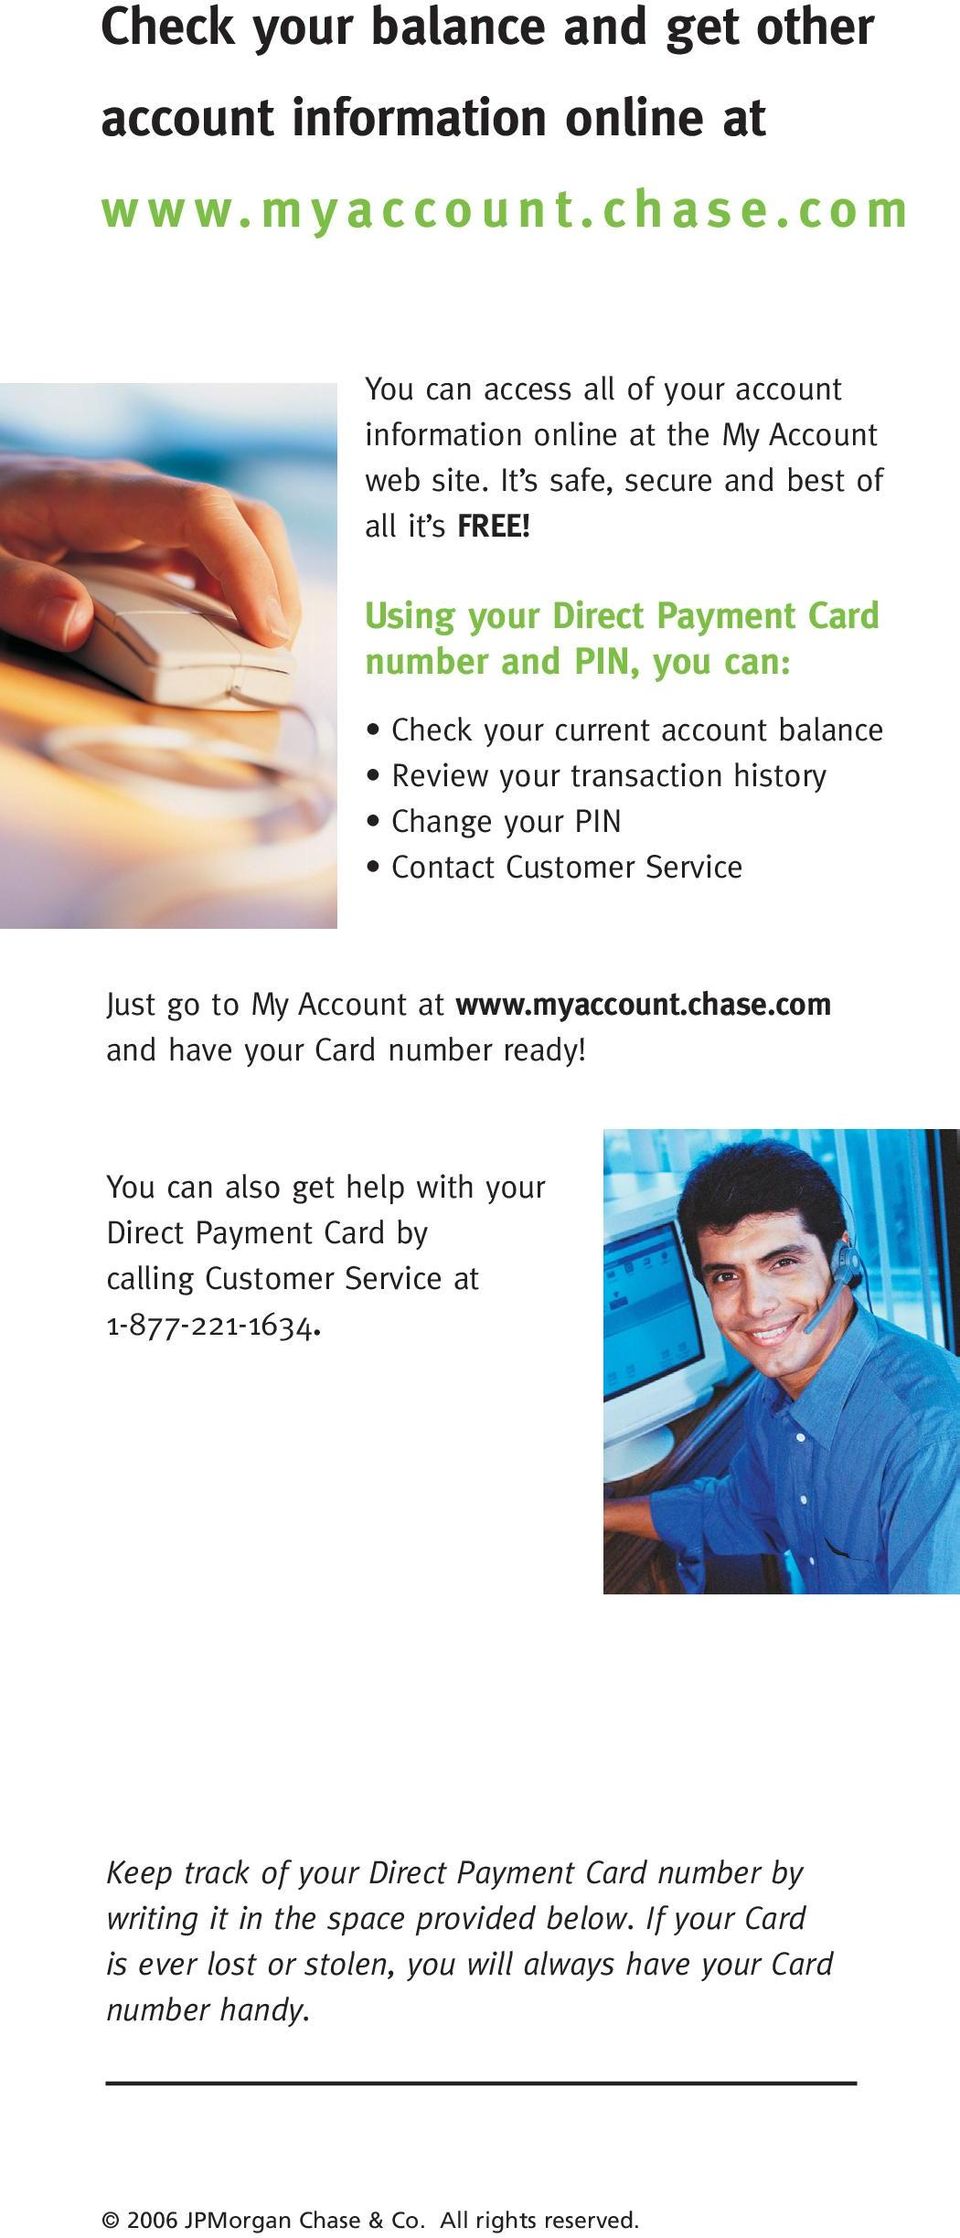 Using your Direct Payment Card number and PIN, you can: Check your current account balance Review your transaction history Change your PIN Contact Customer Service Just go to My Account at www.